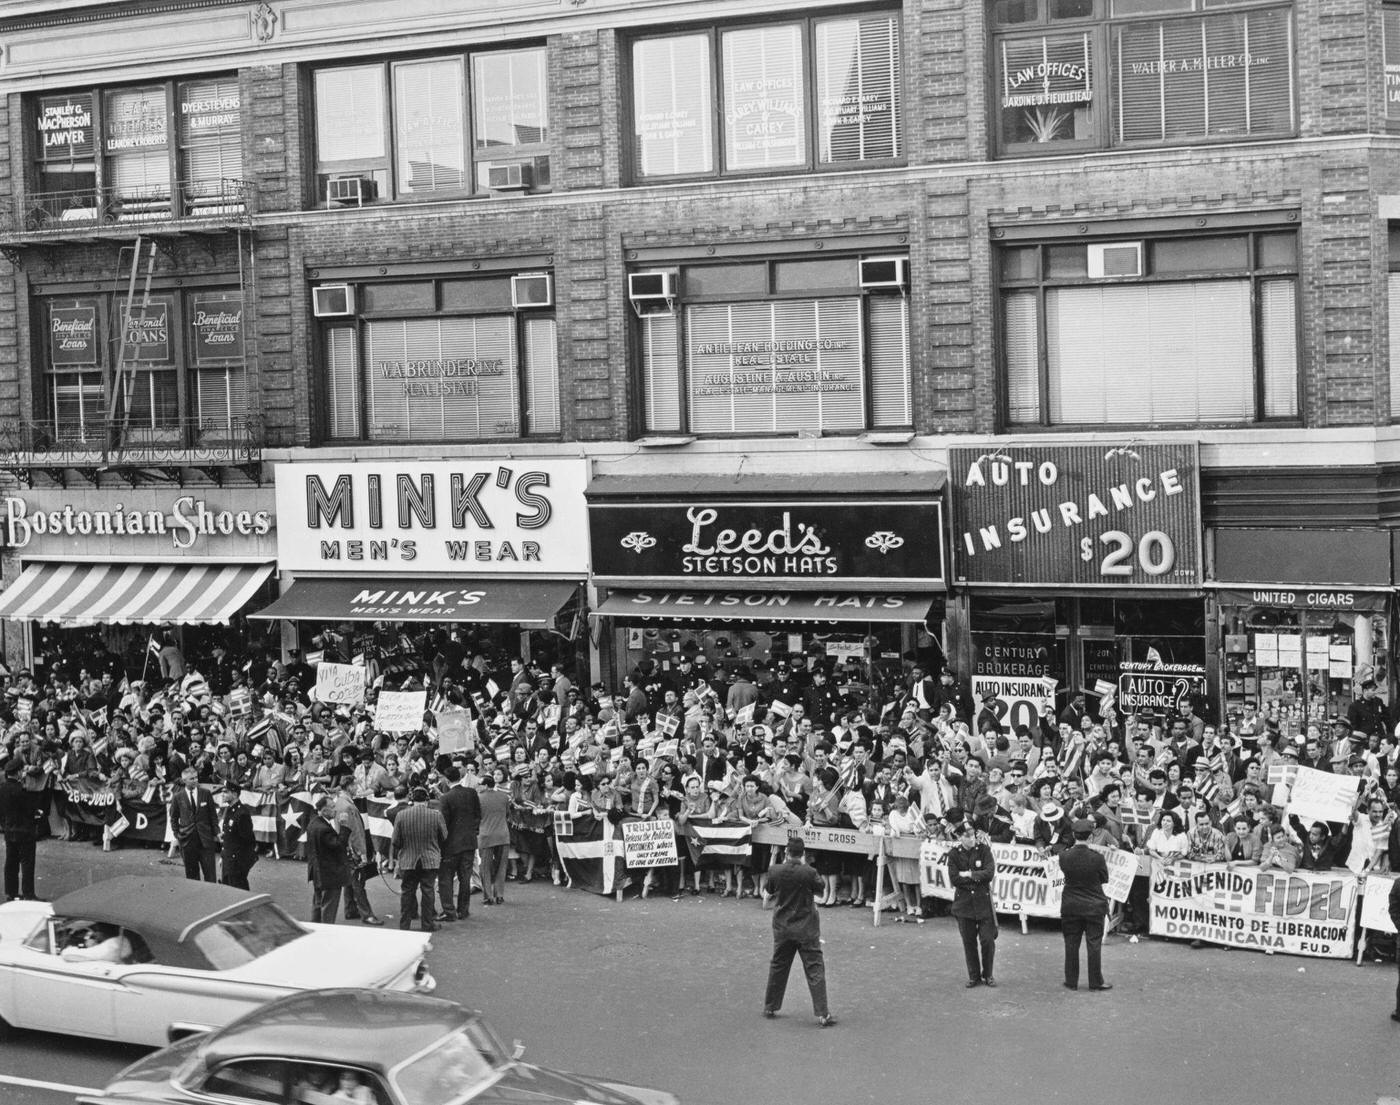 Critics And Supporters Of Fidel Castro Outside The Hotel Theresa, Displaying Banners, Stores Include Bostonian Shoes, Mink'S Men'S Wear, Leed'S Stetson Hats And Auto Insurance $20, Manhattan, 1960